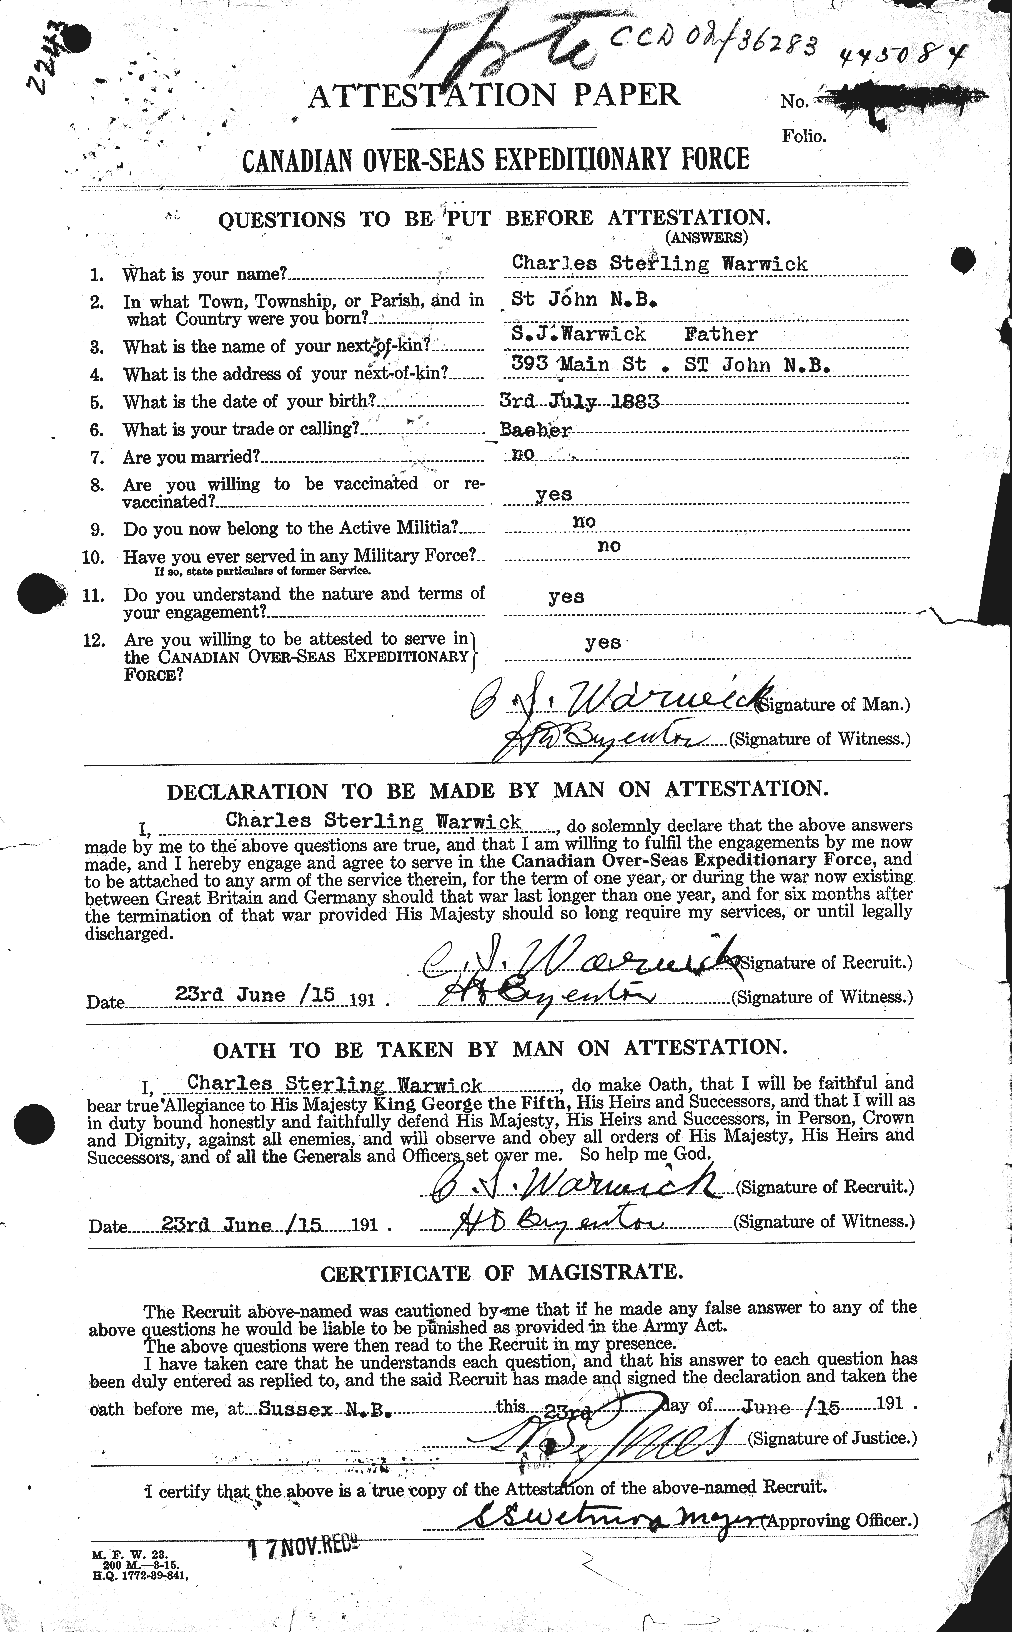 Personnel Records of the First World War - CEF 656987a